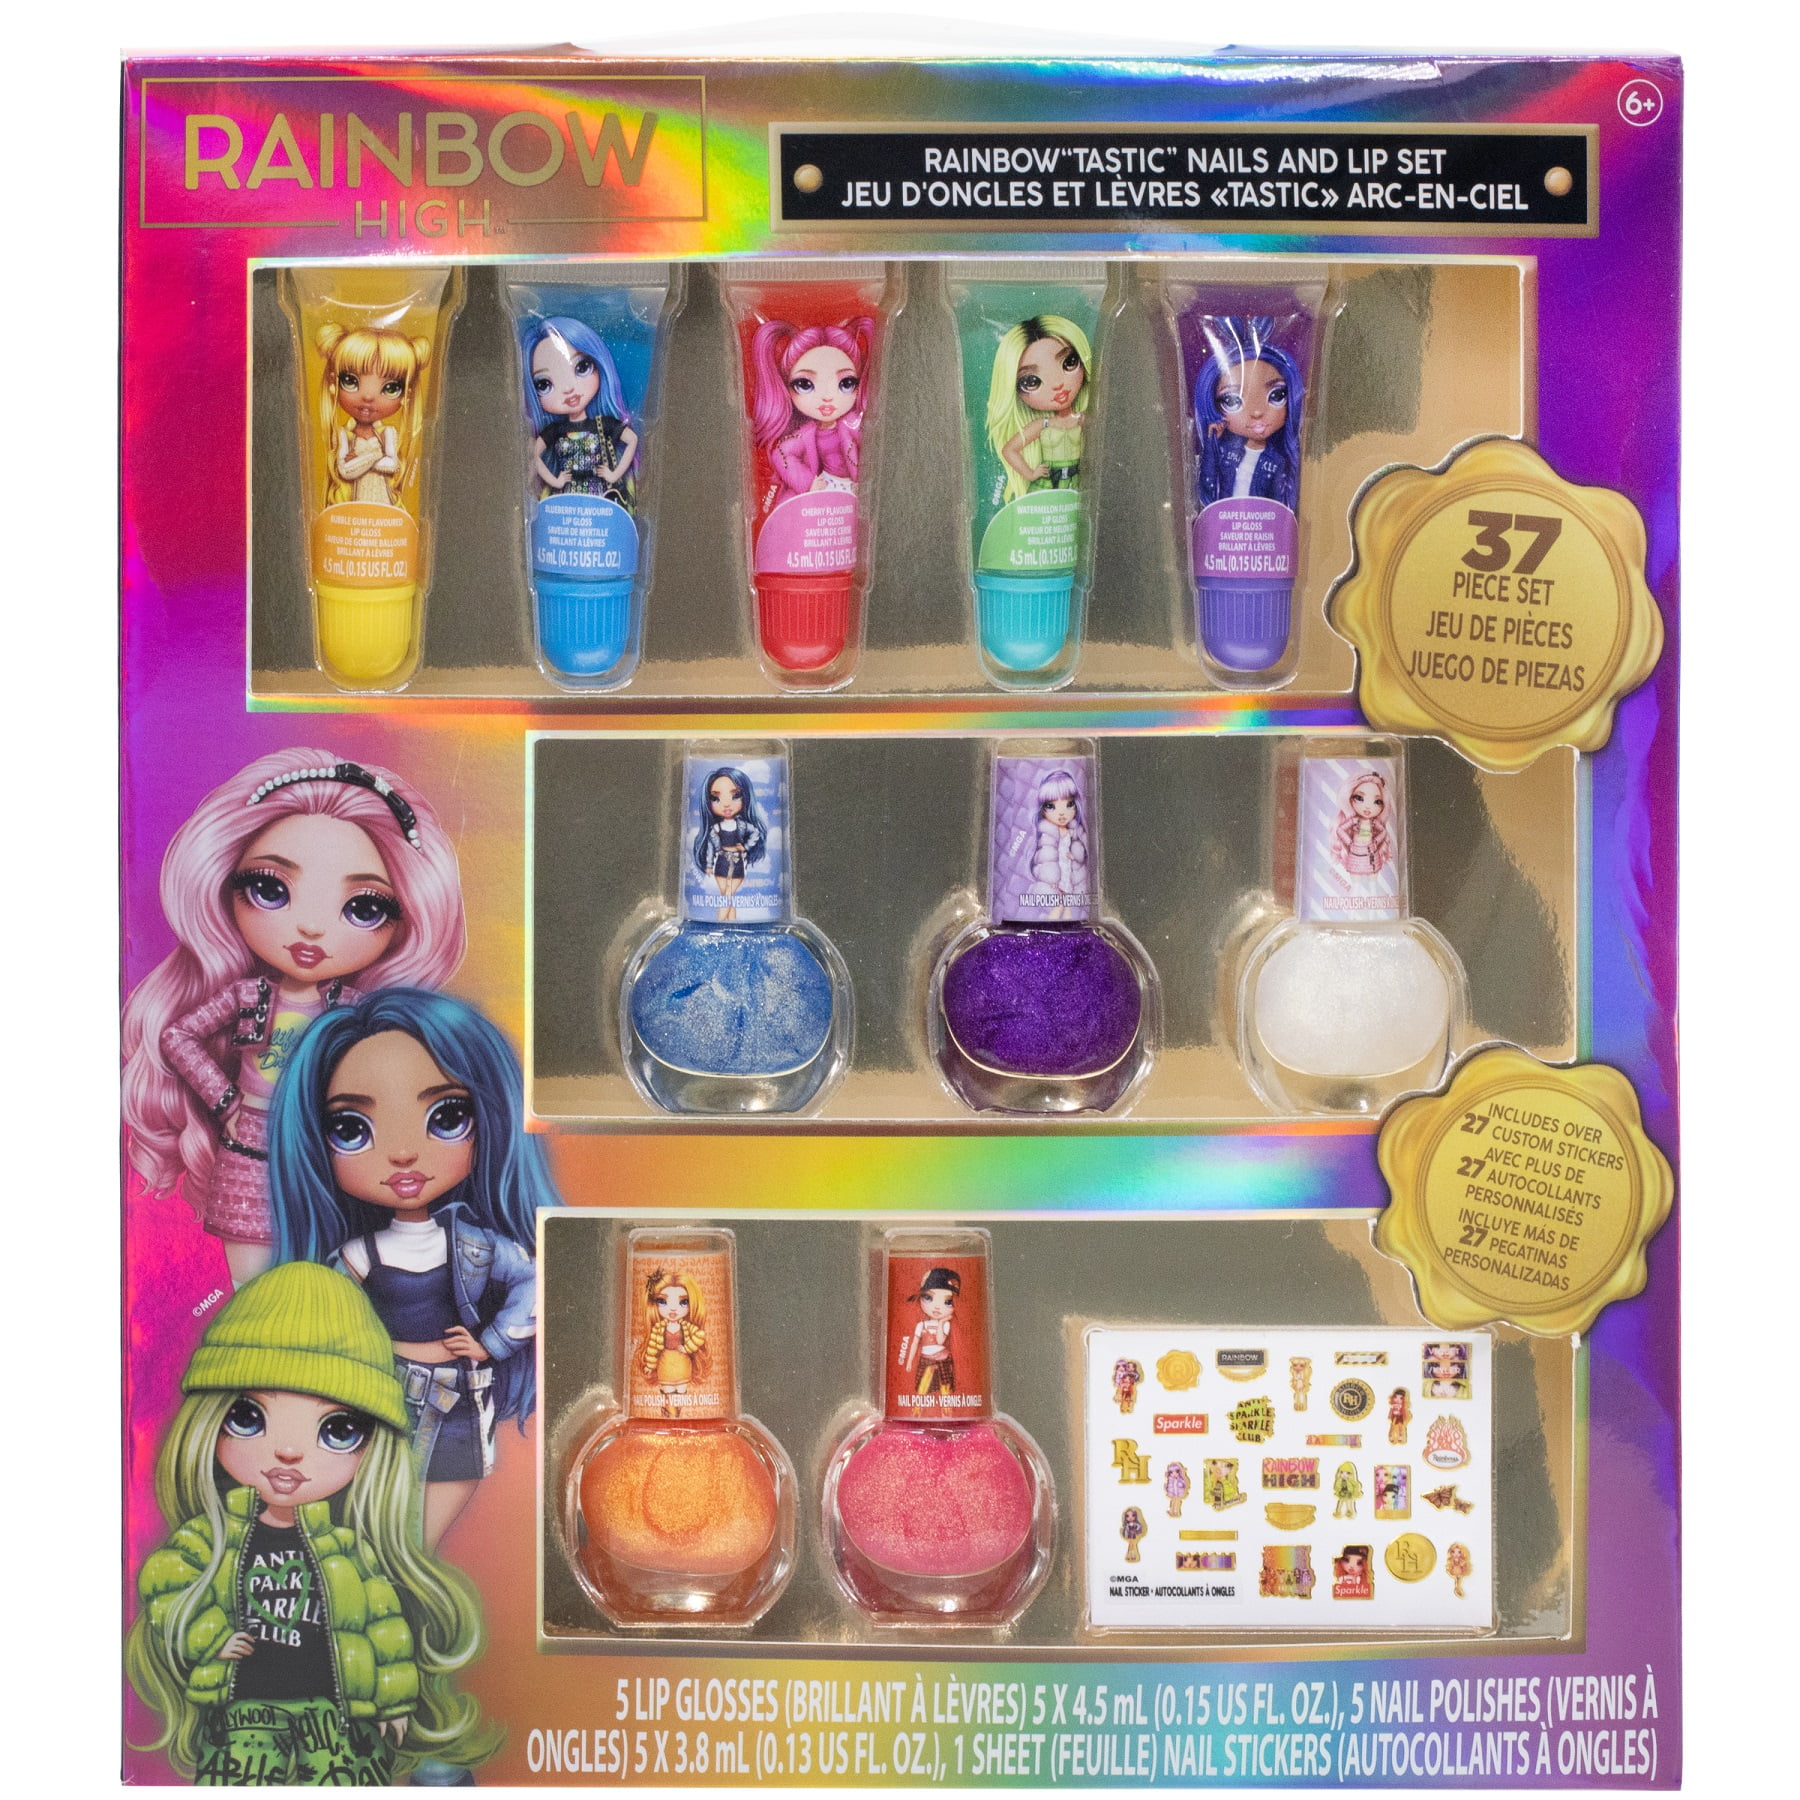 Rainbow High 4 Eye Shadows Ages 6+ perfect for Parties 8 Lip Gloss & 4 Shimmer Makeup Set for Kids Toddler Girls Sleepovers and Makeovers Townley Girl Beauty Compact Set Kit with Brushes 